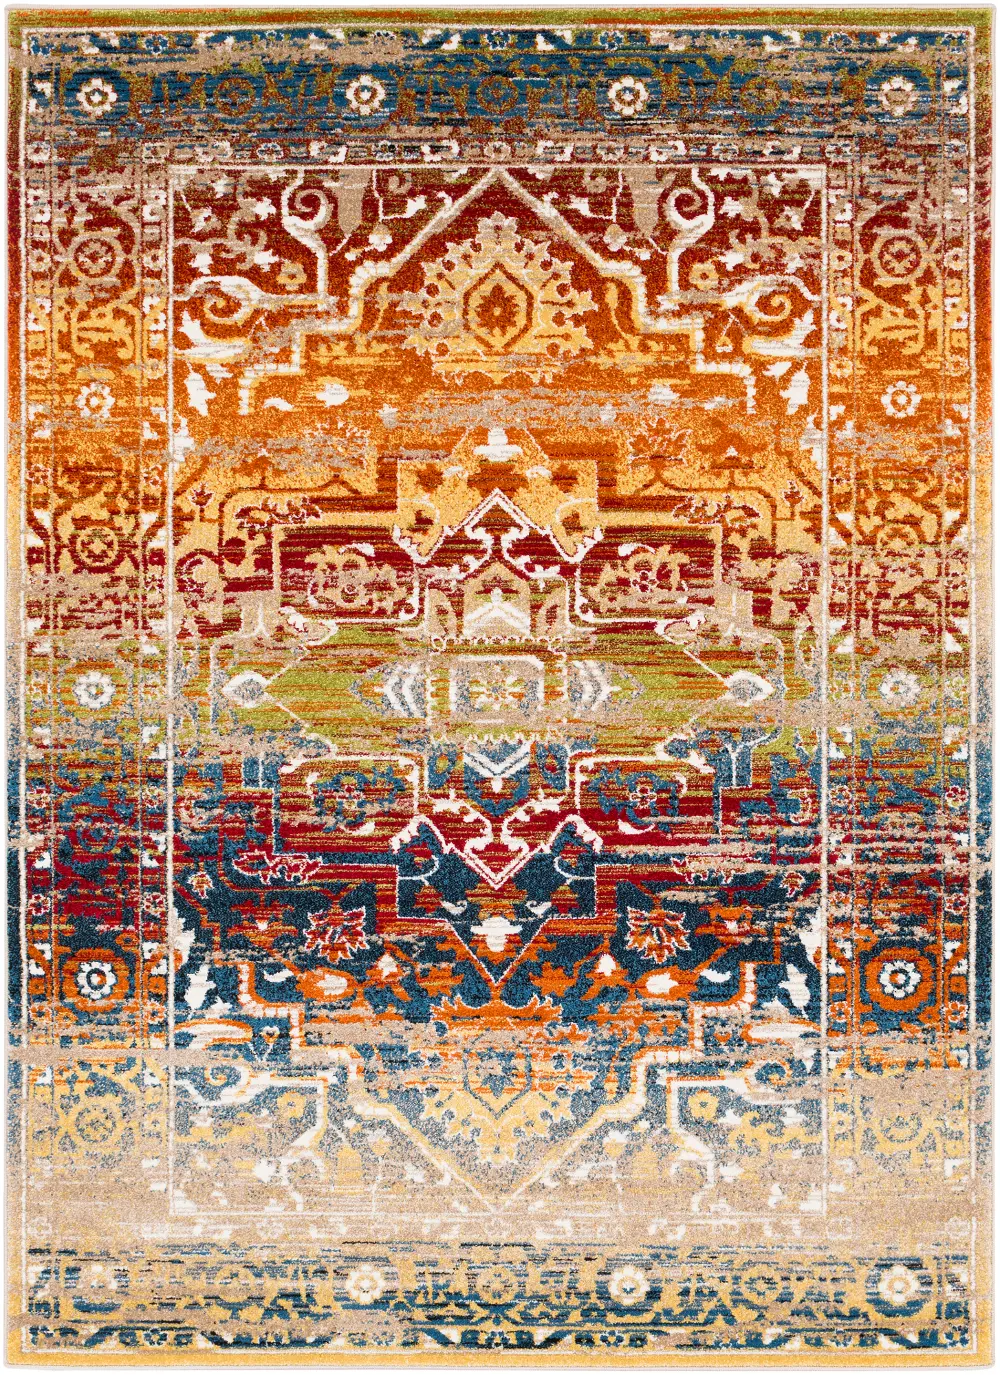 10 x 13 X-Large Traditional Red and Orange Area Rug - Serapi-1